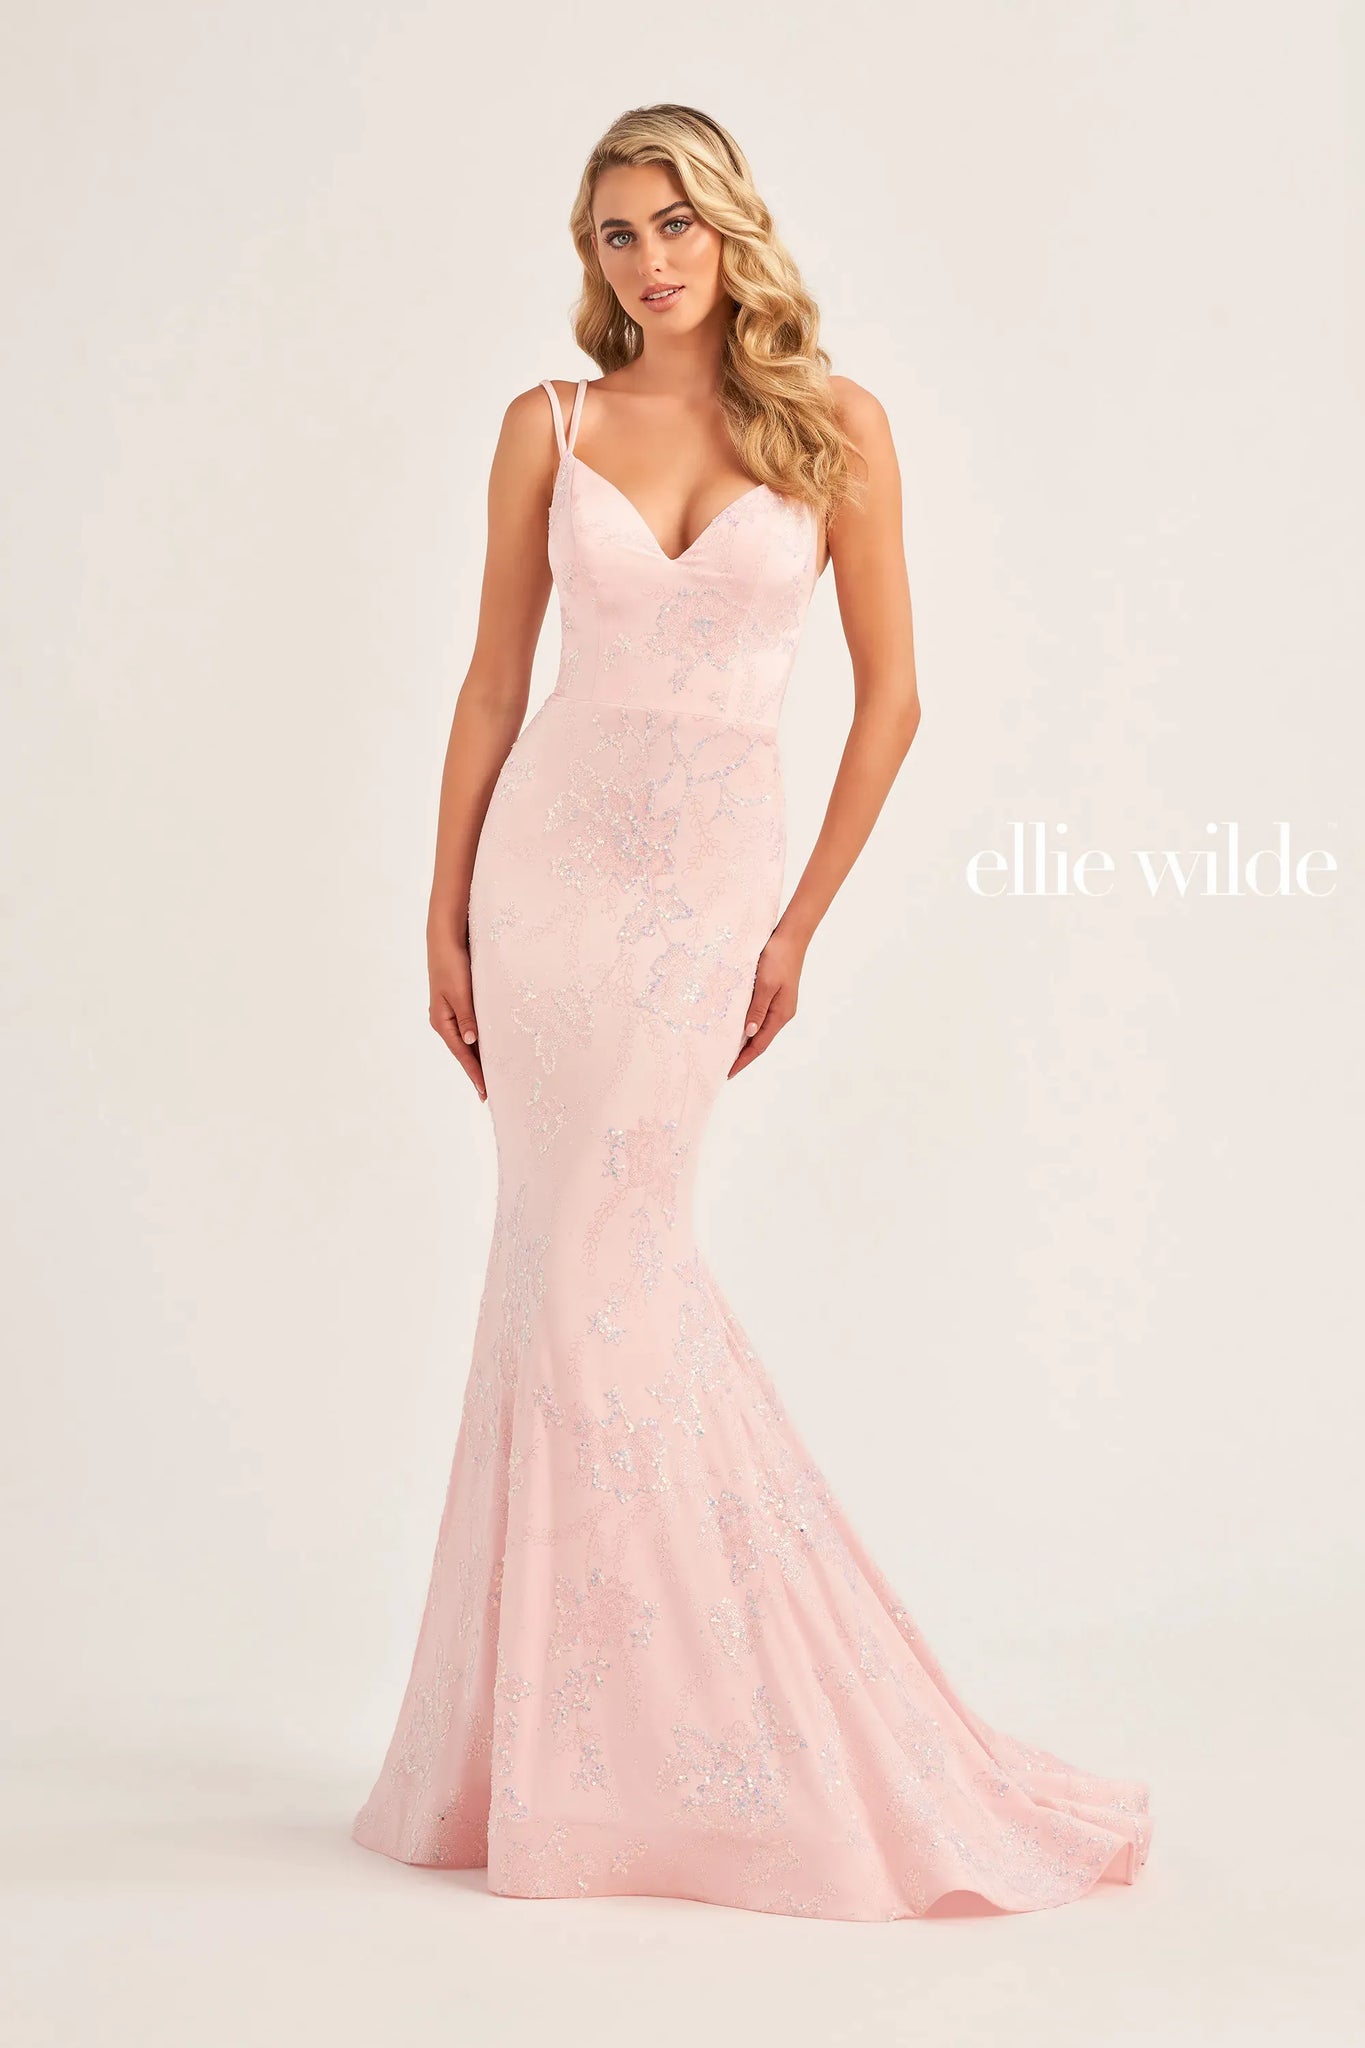 Unique and classy gown by Ellie Wilde EW35083 is the perfect choice for your senior prom. An adjustable lace up corset is perfect to cinch your waistline and show off your curves. Fitted silhouette is adorned in a ravishing subtle floral pattern. A long sweep train and v cut neckline are added to complete the look.